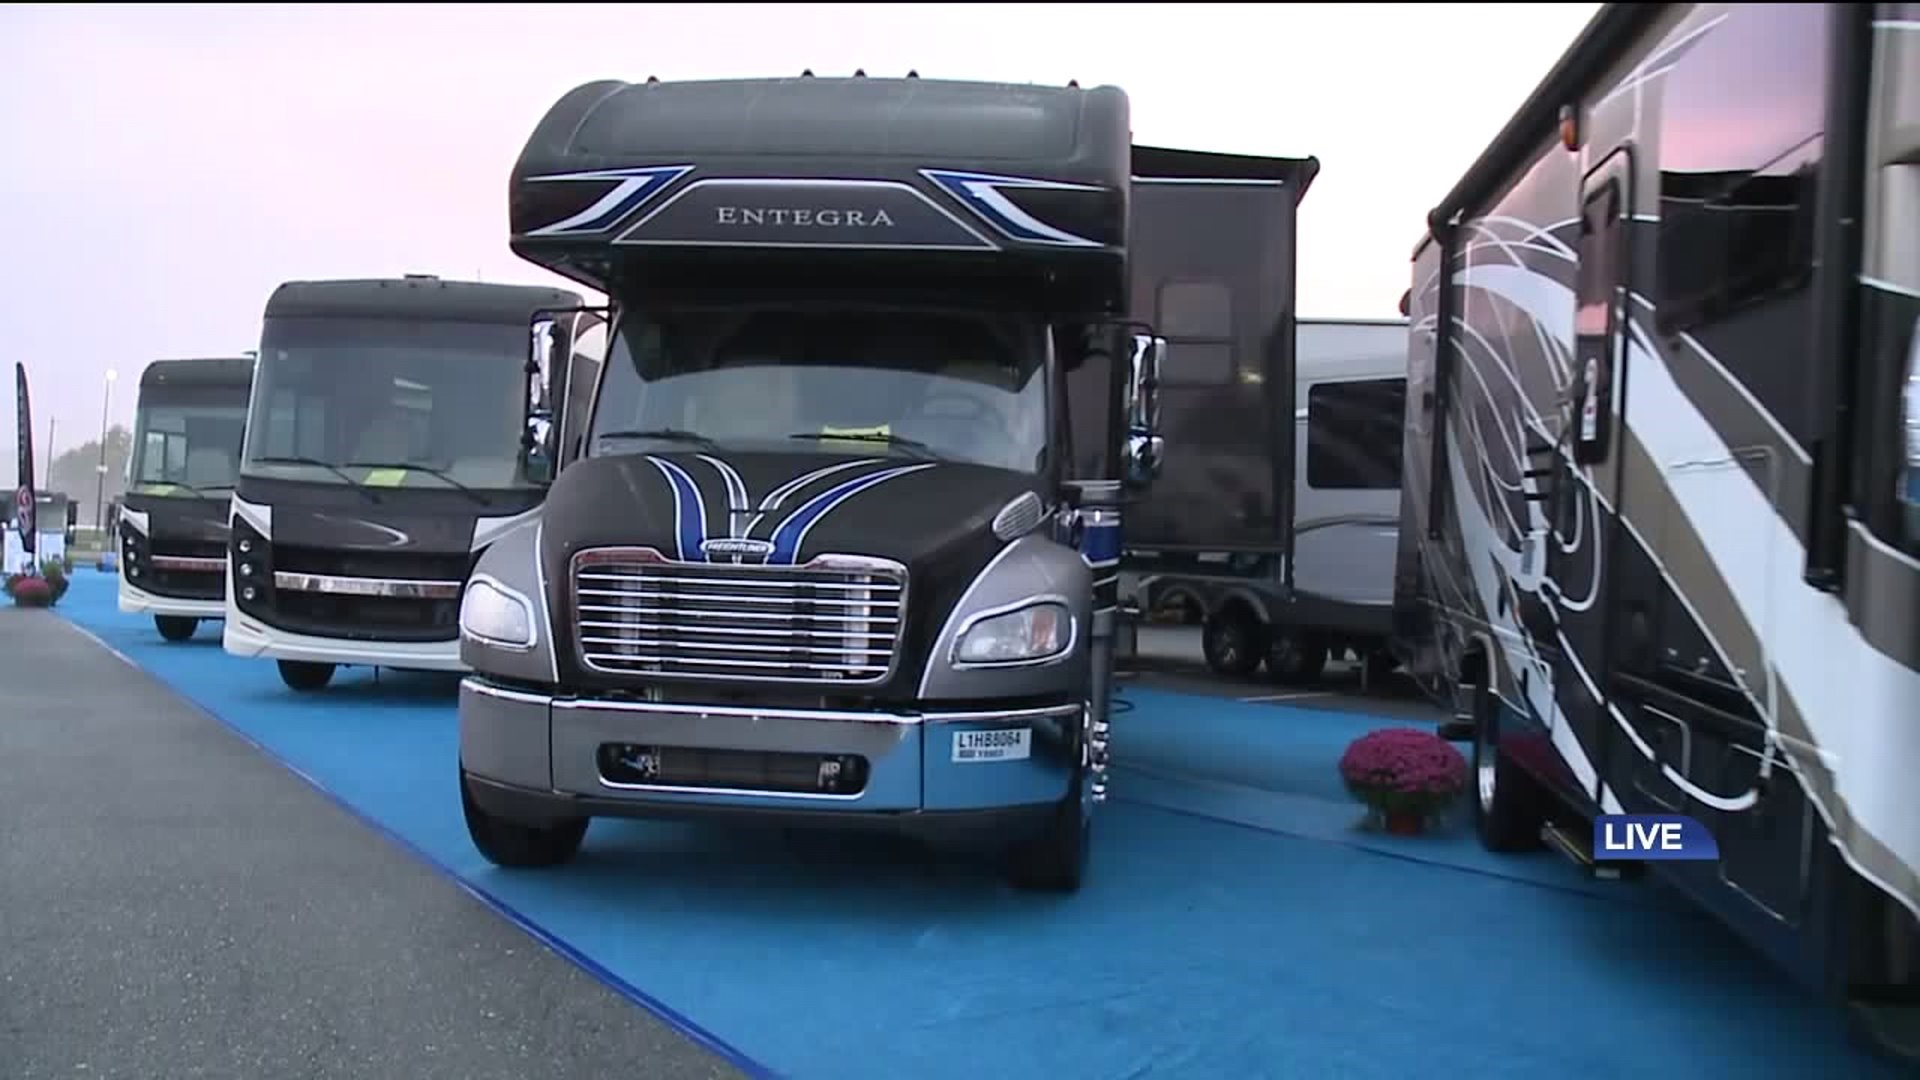 Taking 'America's Largest RV Show' for a Spin